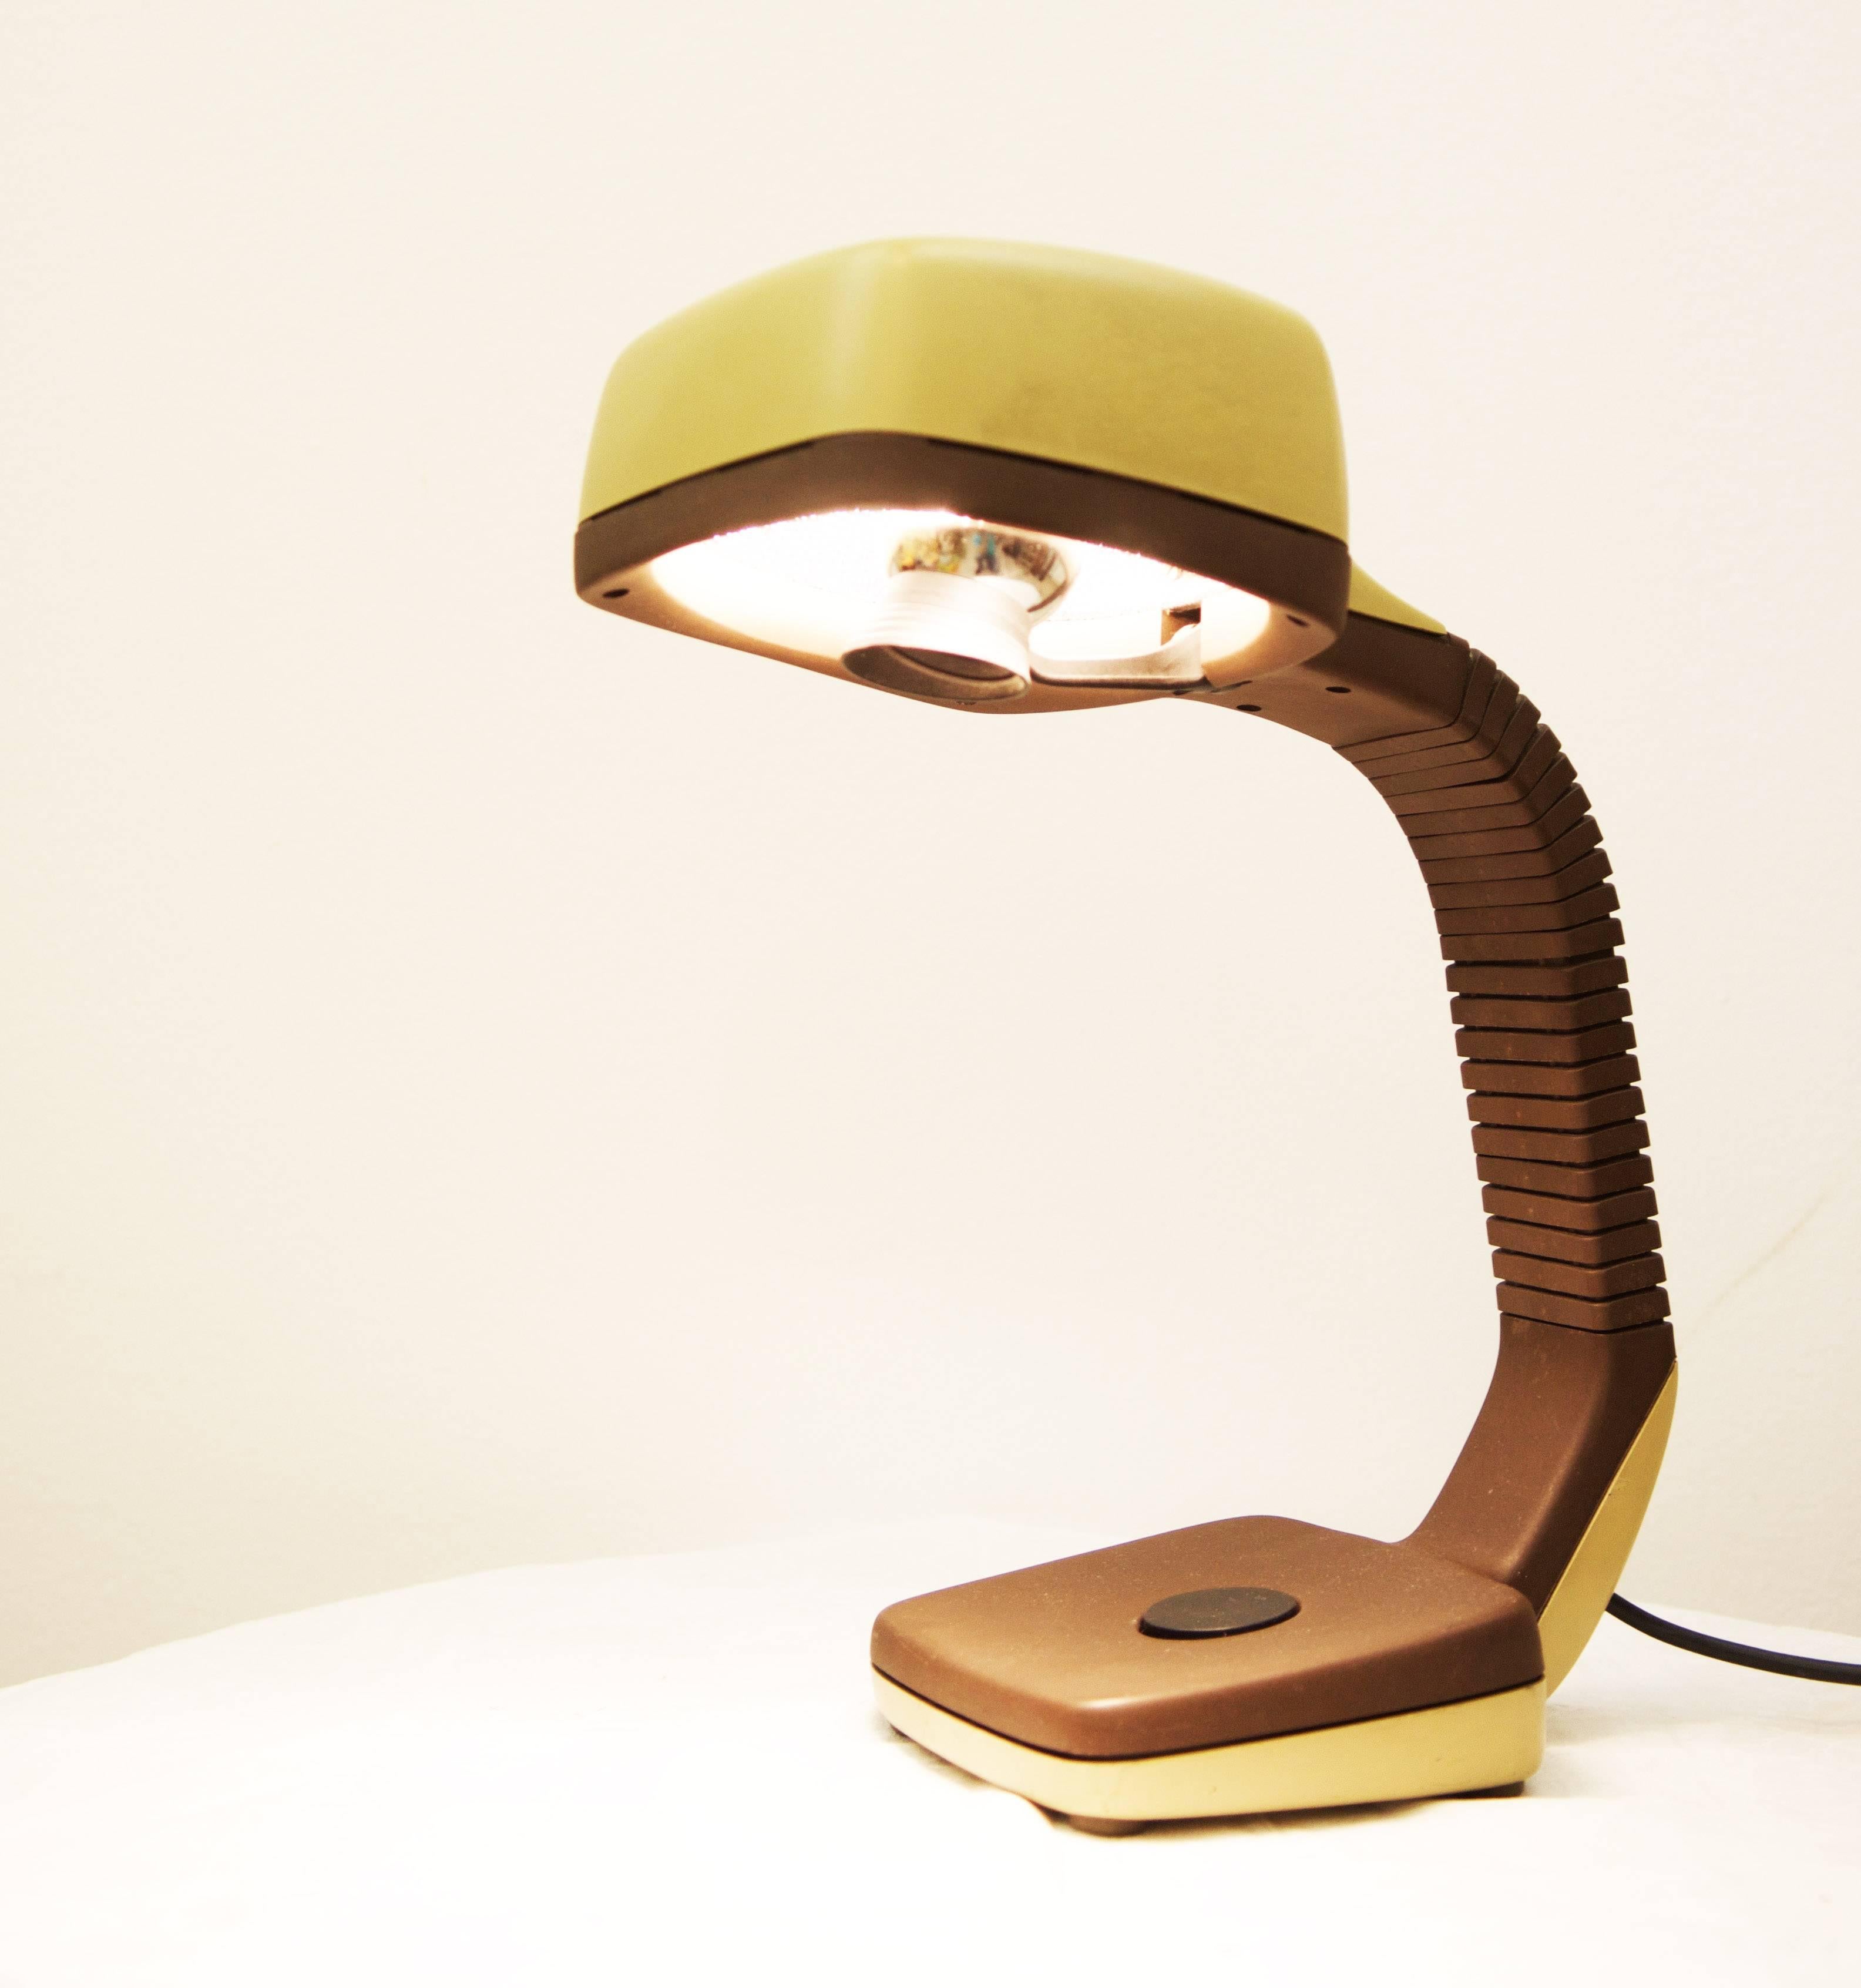 Desk lamp of Hoffmeister from the 70s / 80s
Stylish gooseneck lamp with sophisticated reflector and E14 bulb:
Due to the light bulb upstream reflector an additional spot effect is achieved!
The gooseneck allows flexible alignment
Large,